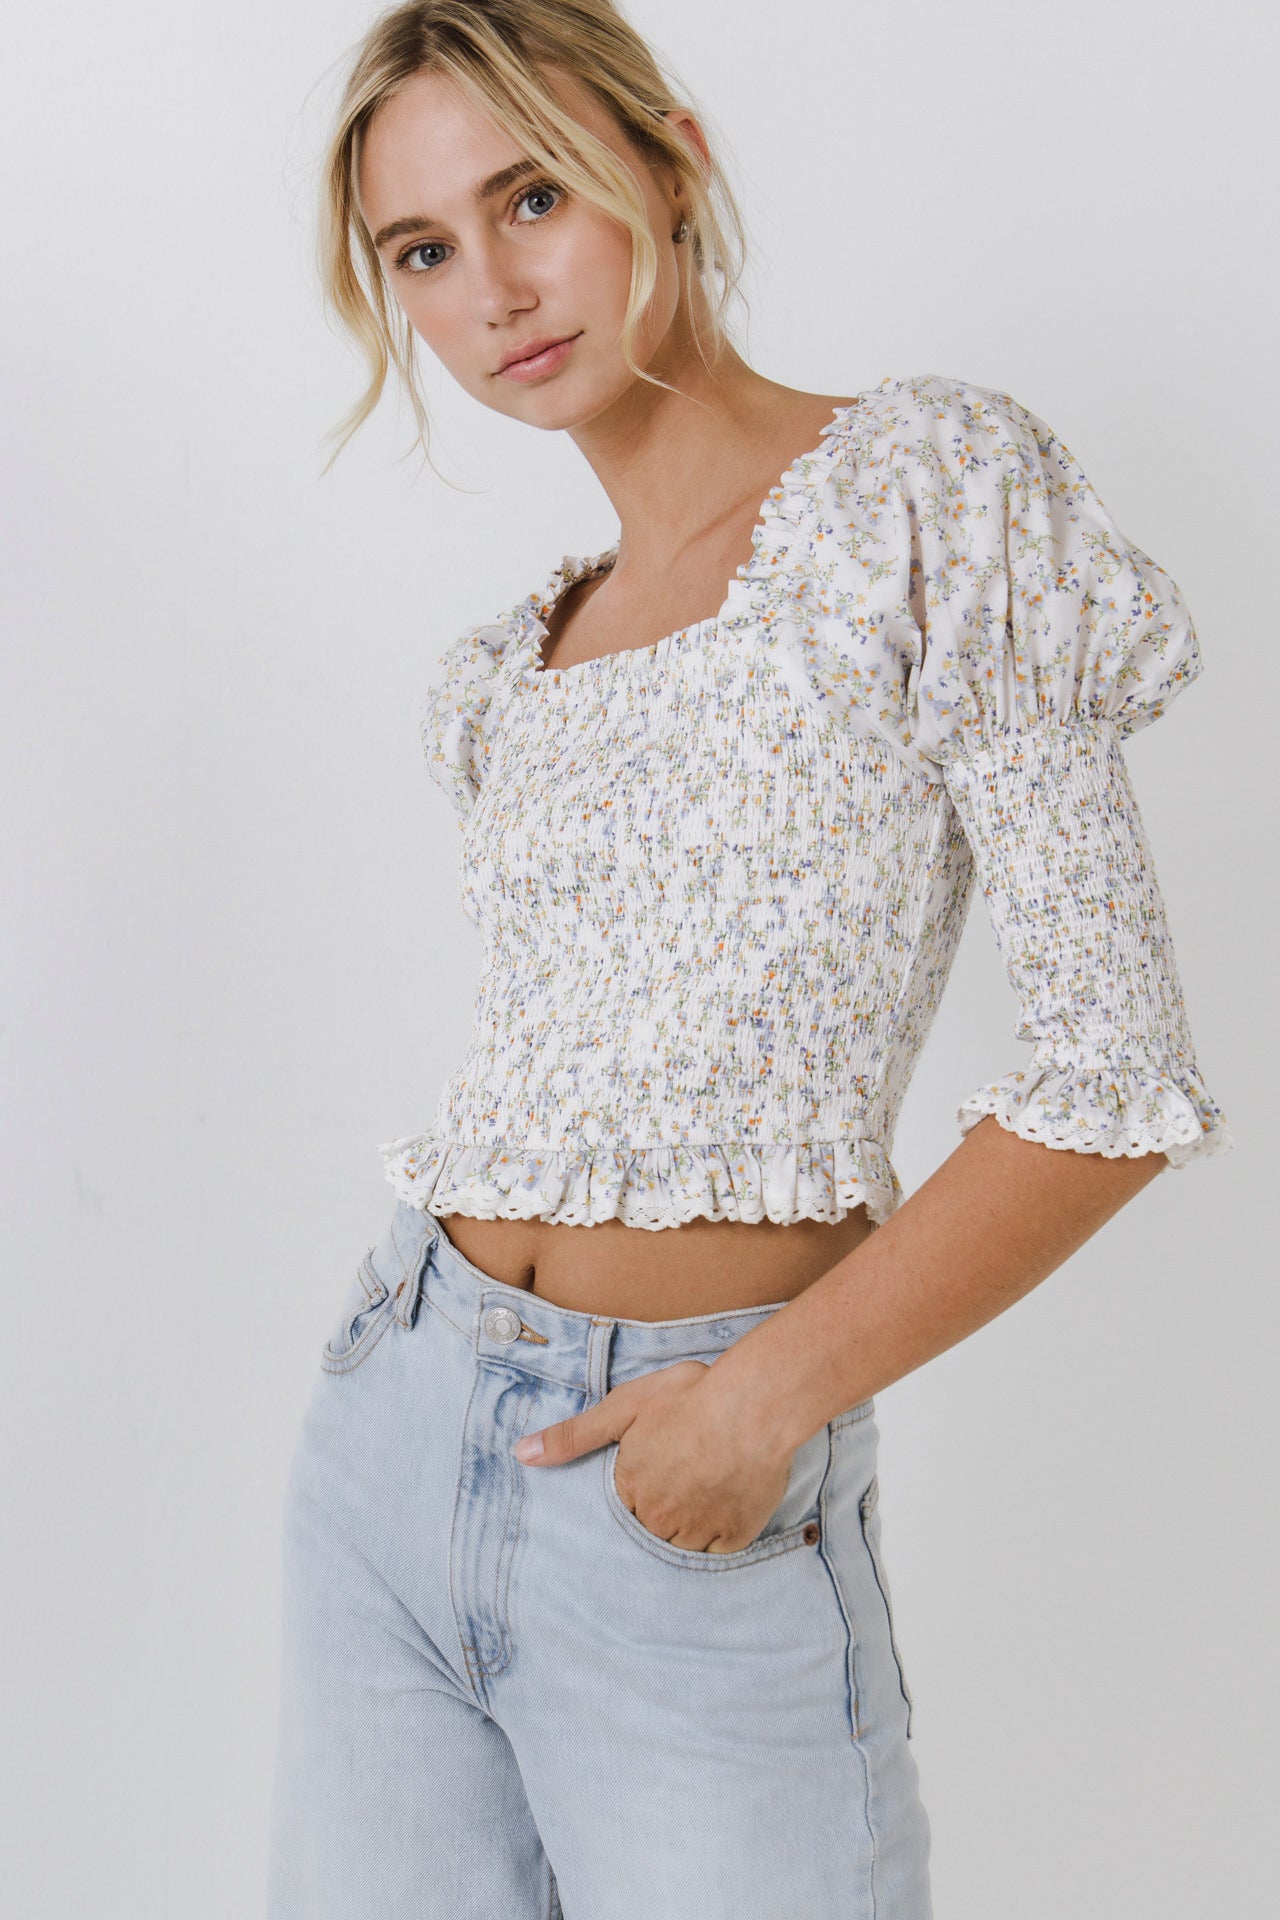 FREE THE ROSES - Smocked Sleeved Puff Sleeve Ruffled Top - TOPS available at Objectrare